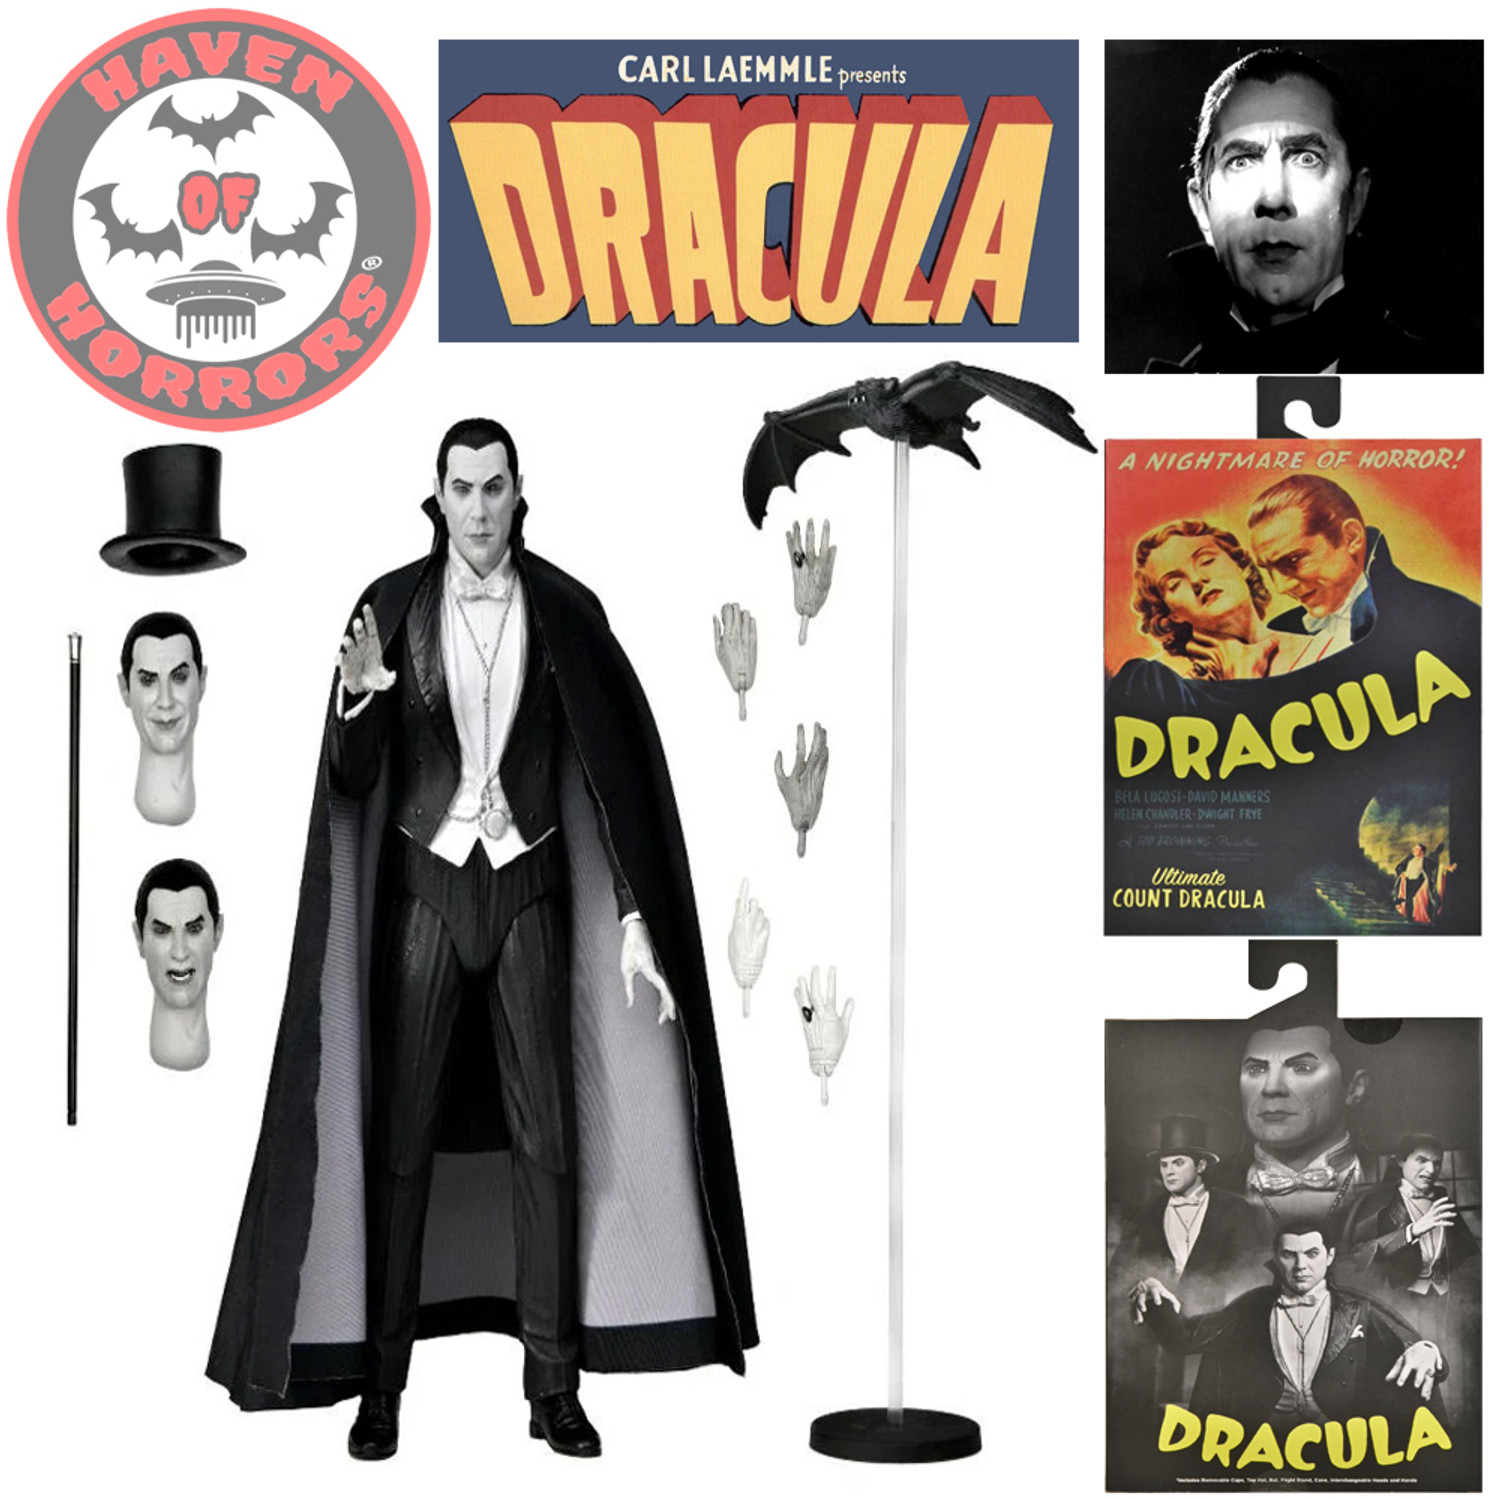 NECA Universal Monsters 7 Scale Action Figure Ultimate